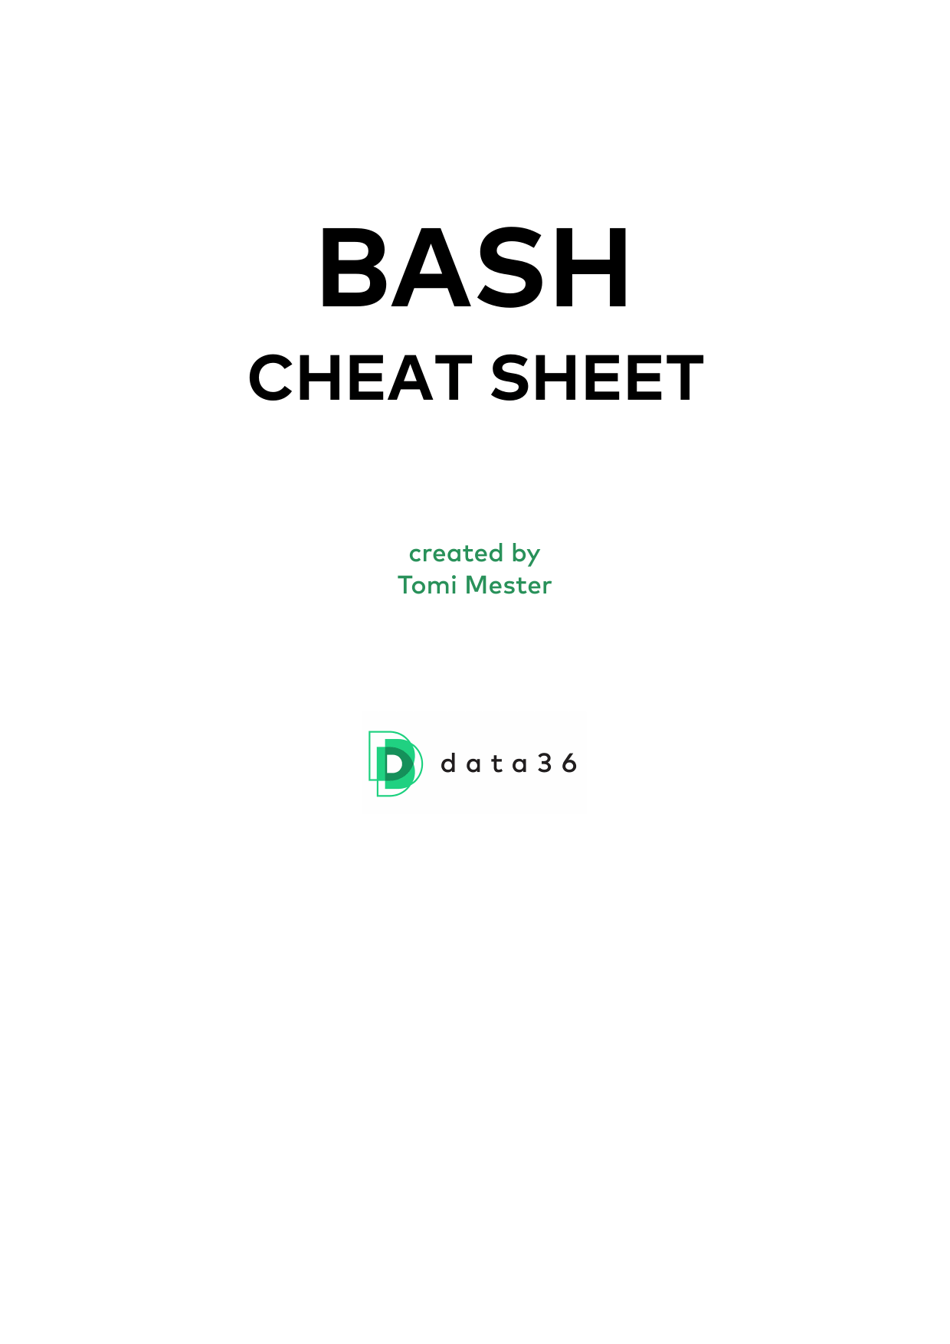 Bash Cheat Sheet - Comprehensive Guide and Reference for Bash Commands and Syntax